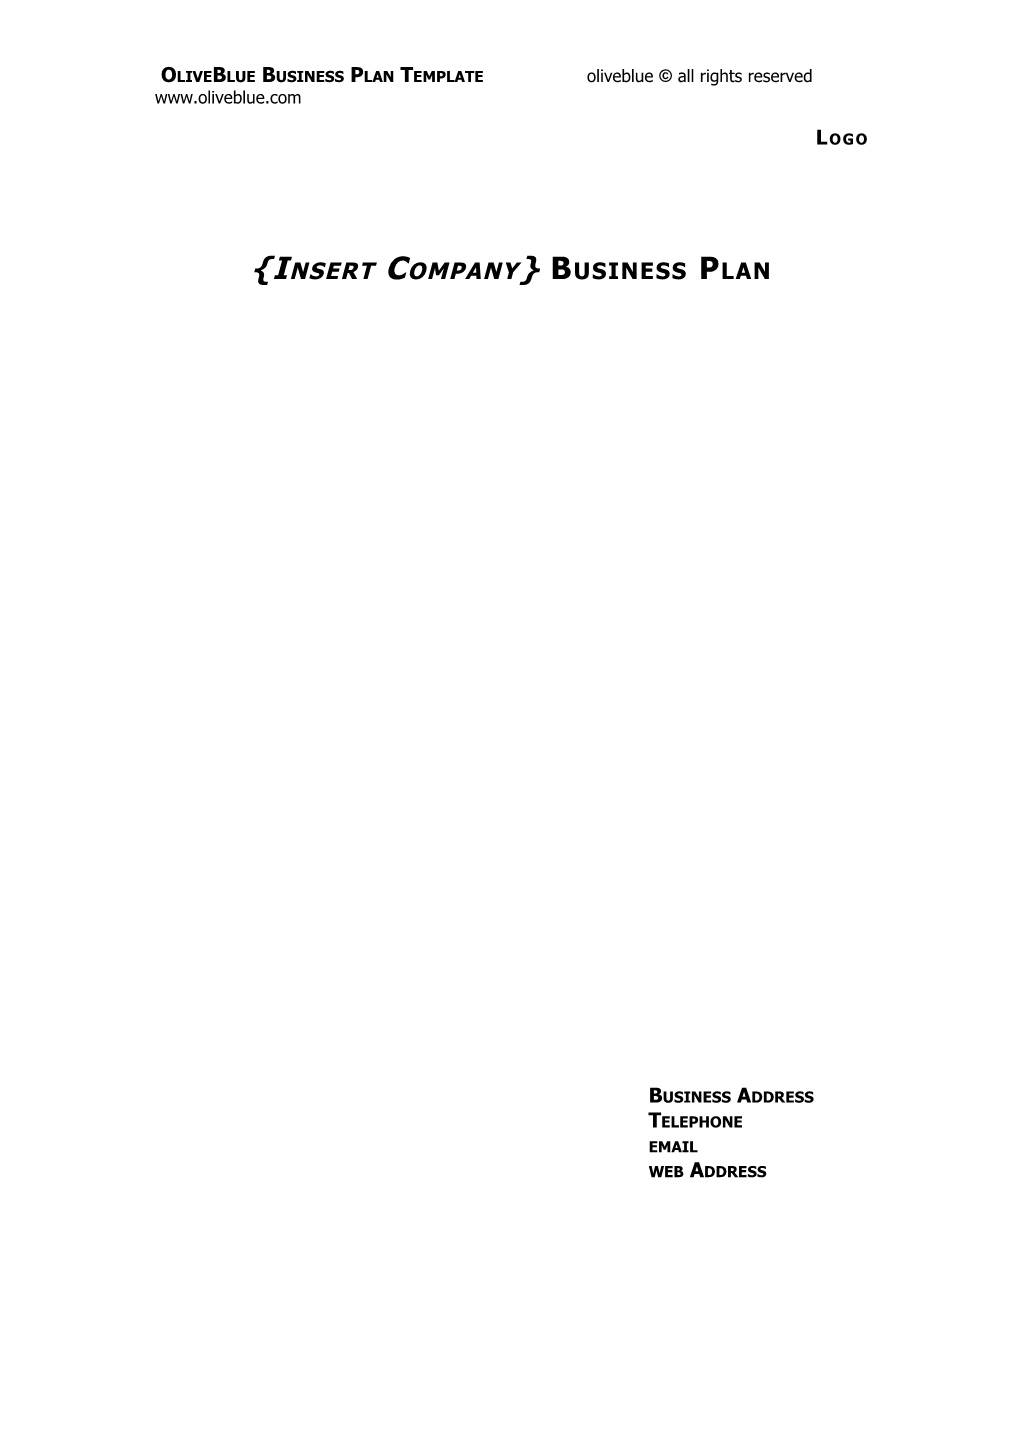 Oliveblue Business Plan Template All Rights Reserved